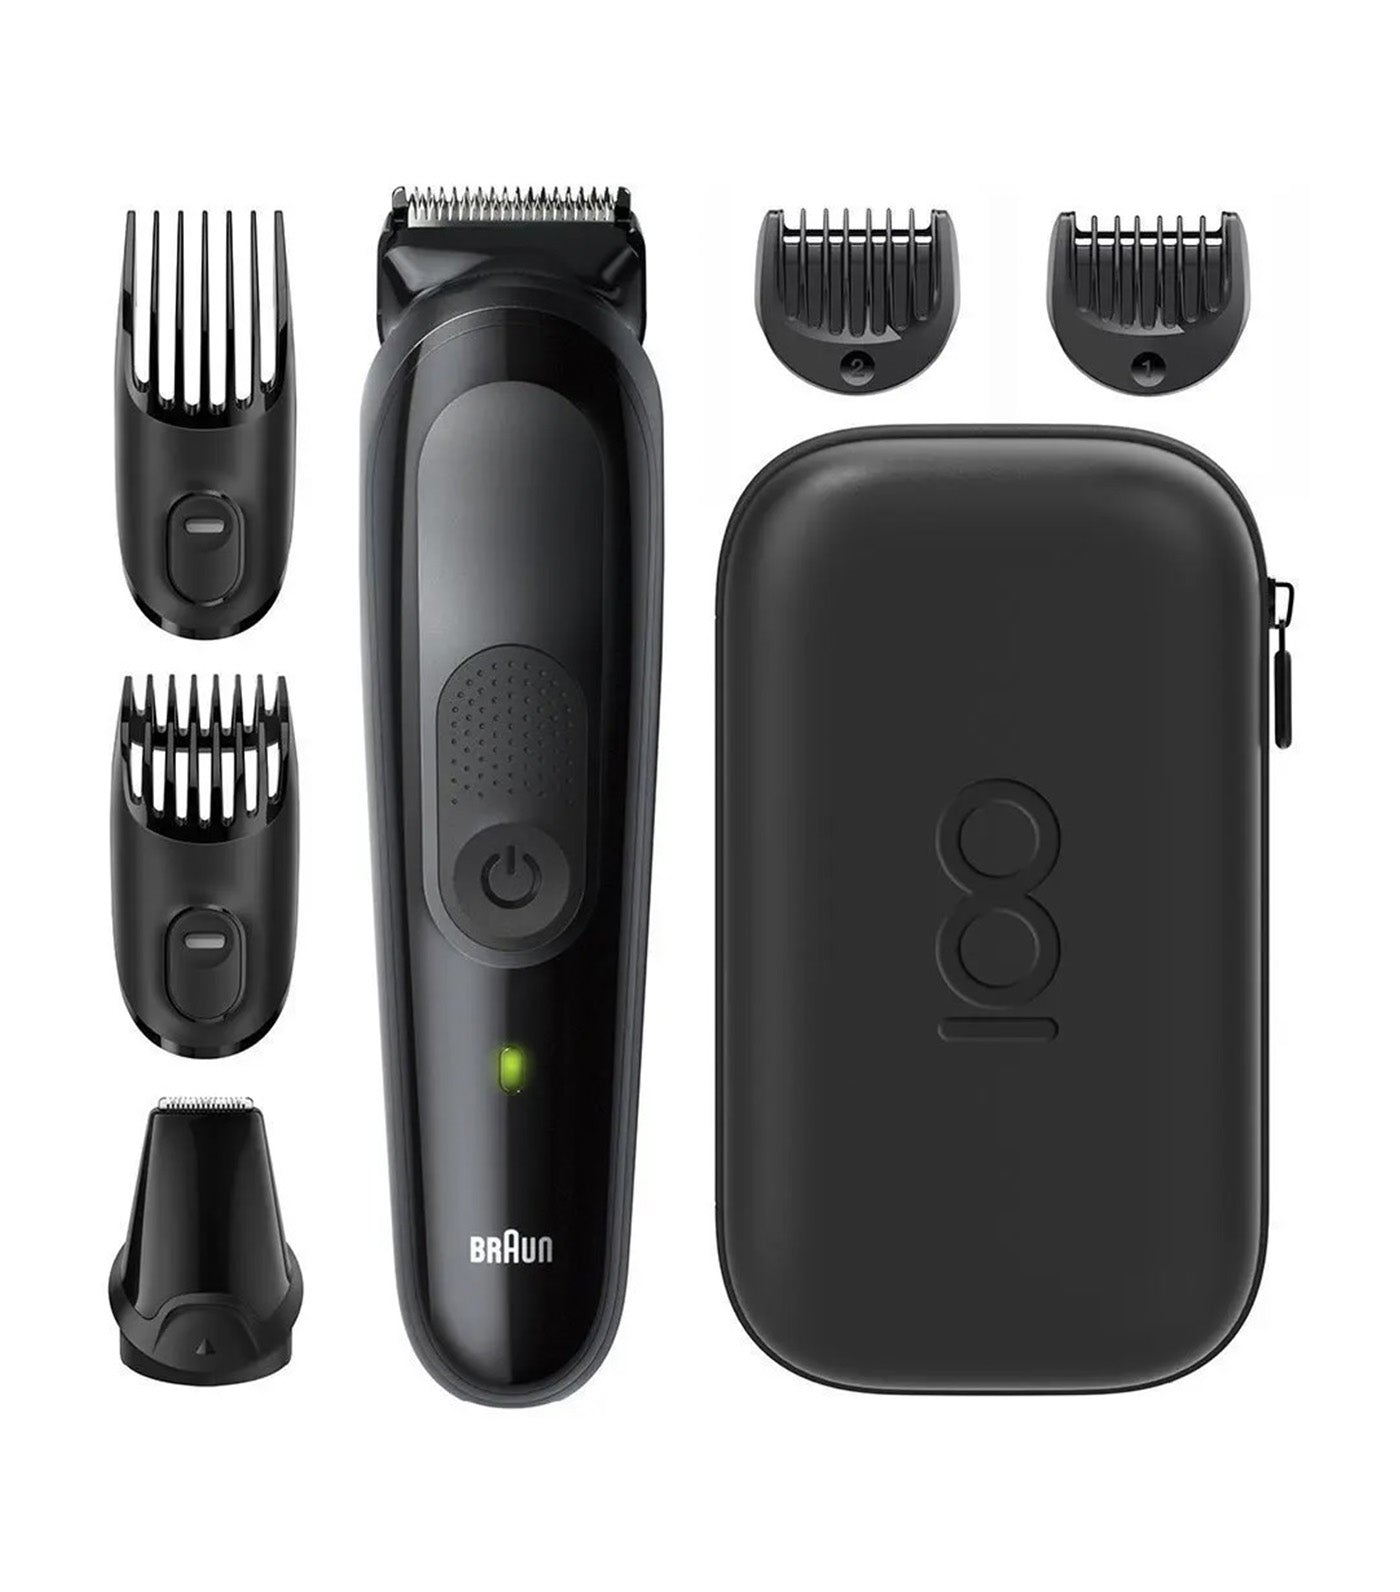 Braun 6-In-1 Travel with Styling Head Years Face Precise Black For Edition 100 Kit Case Styling Limited and